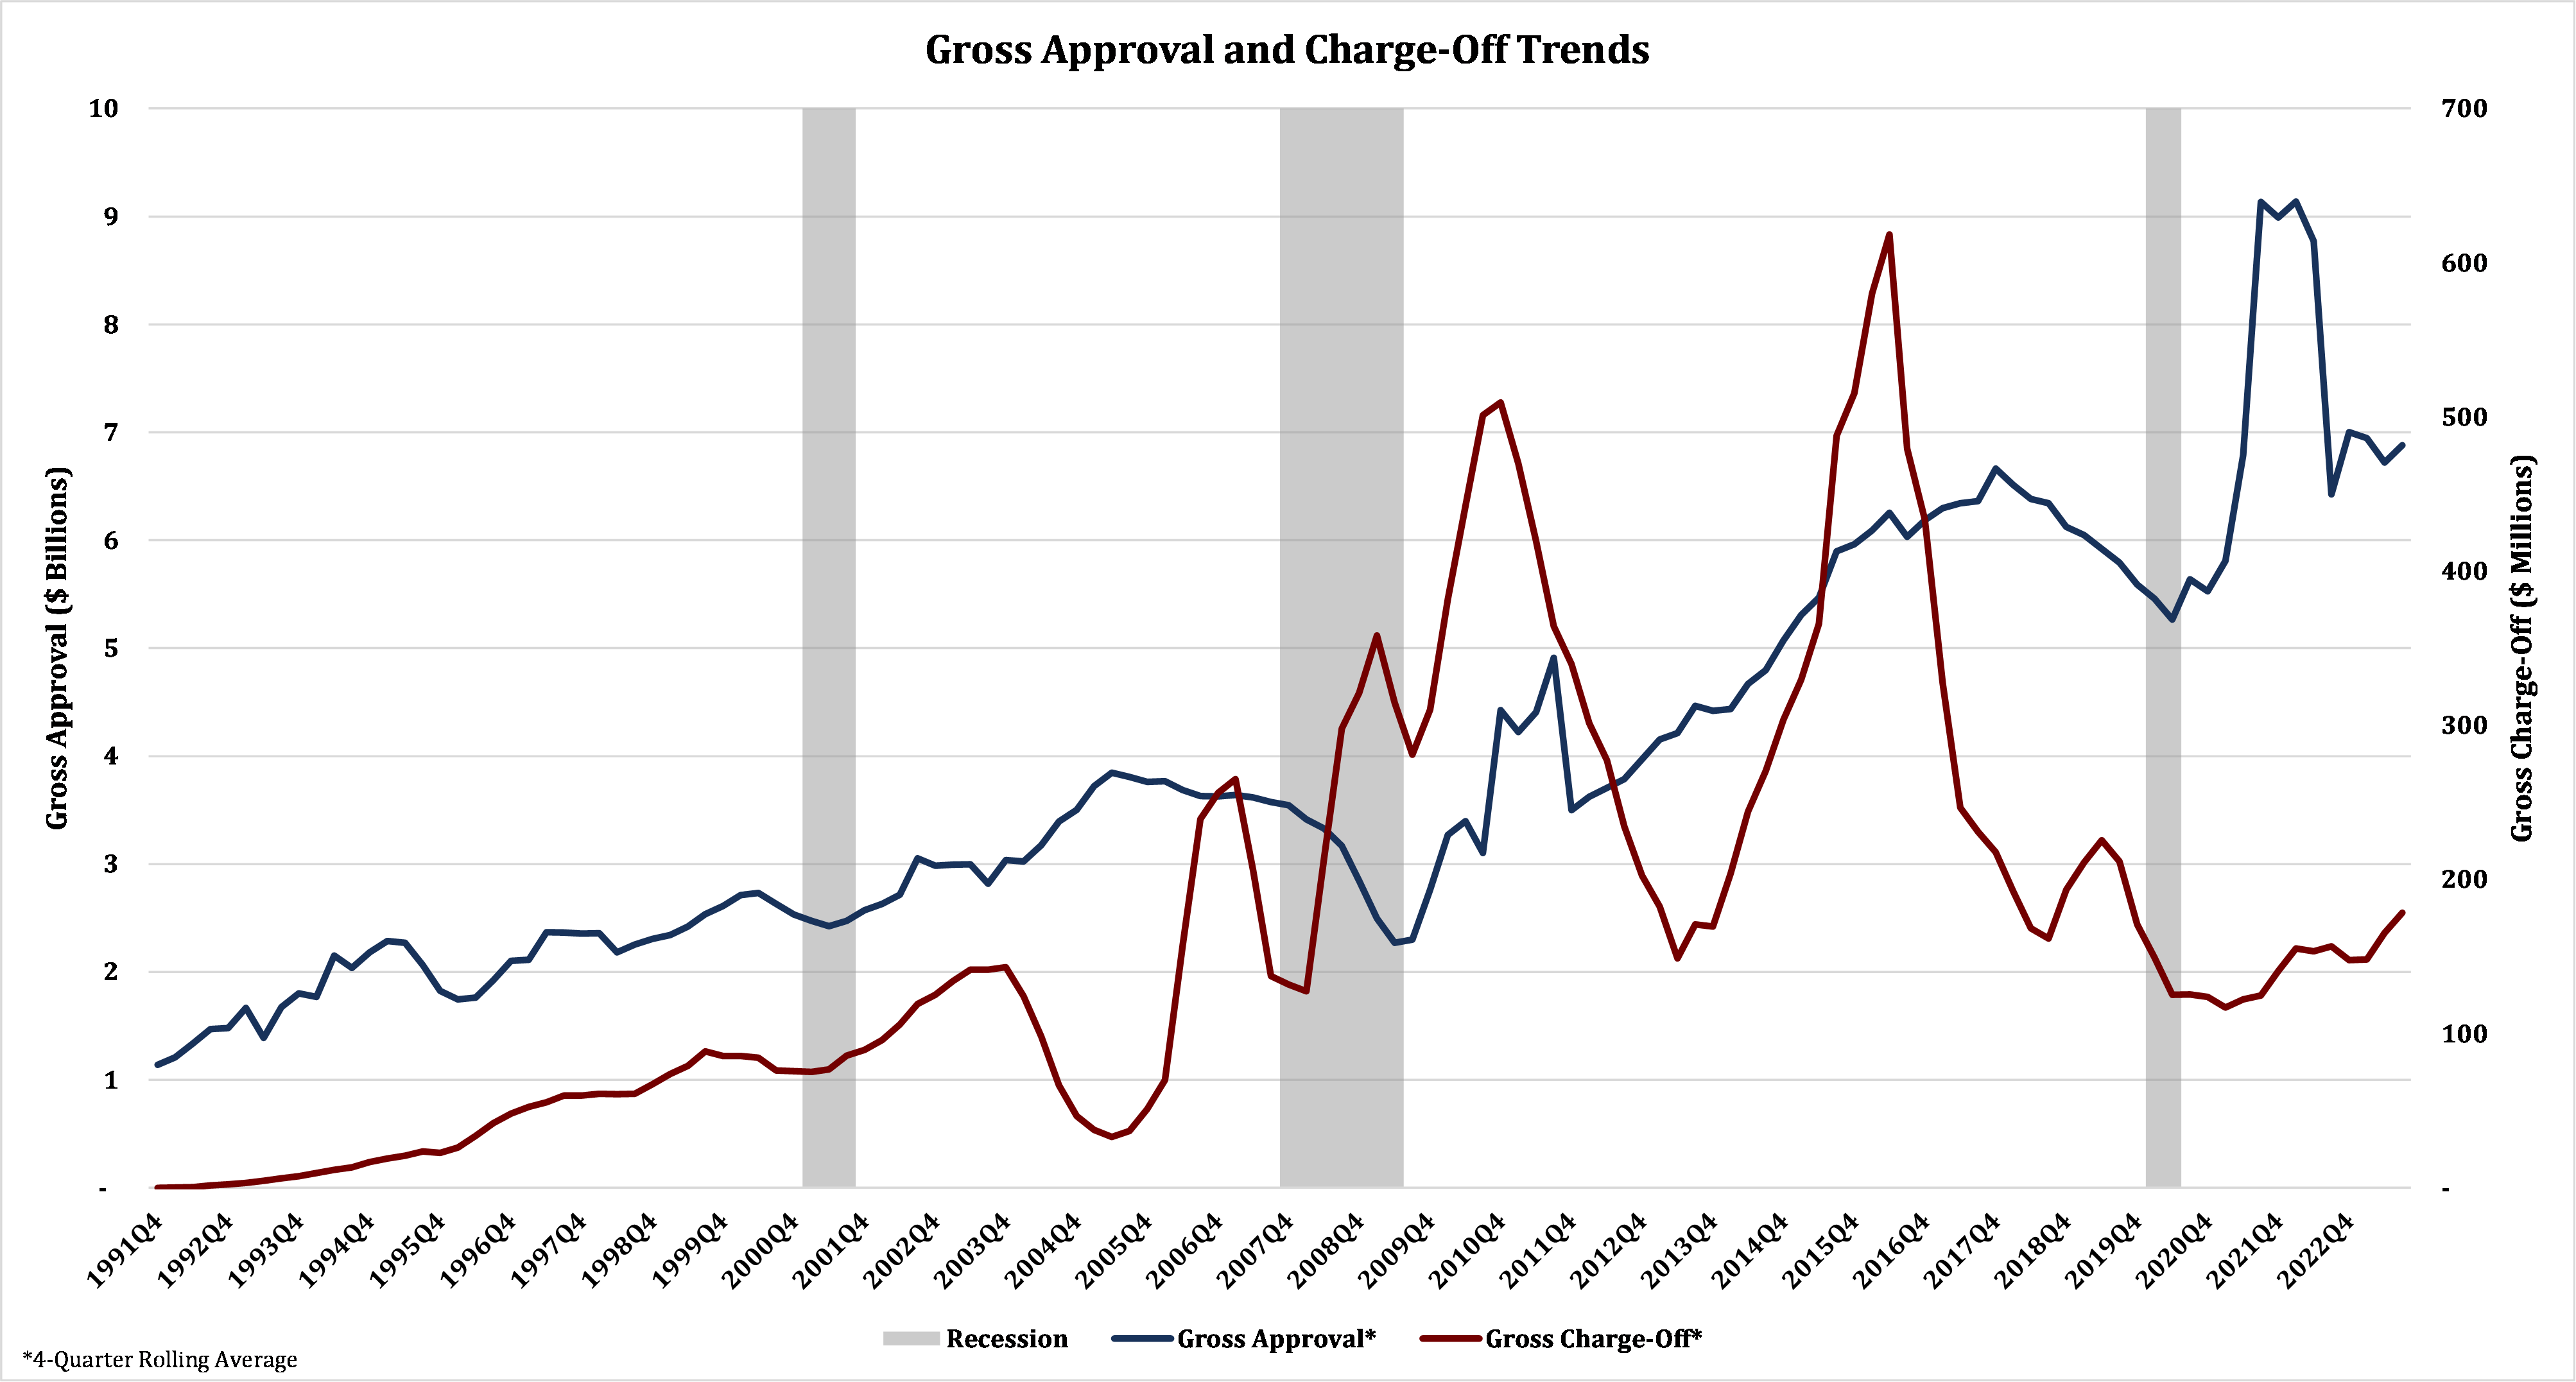 Gross approval and charge-off trends graph